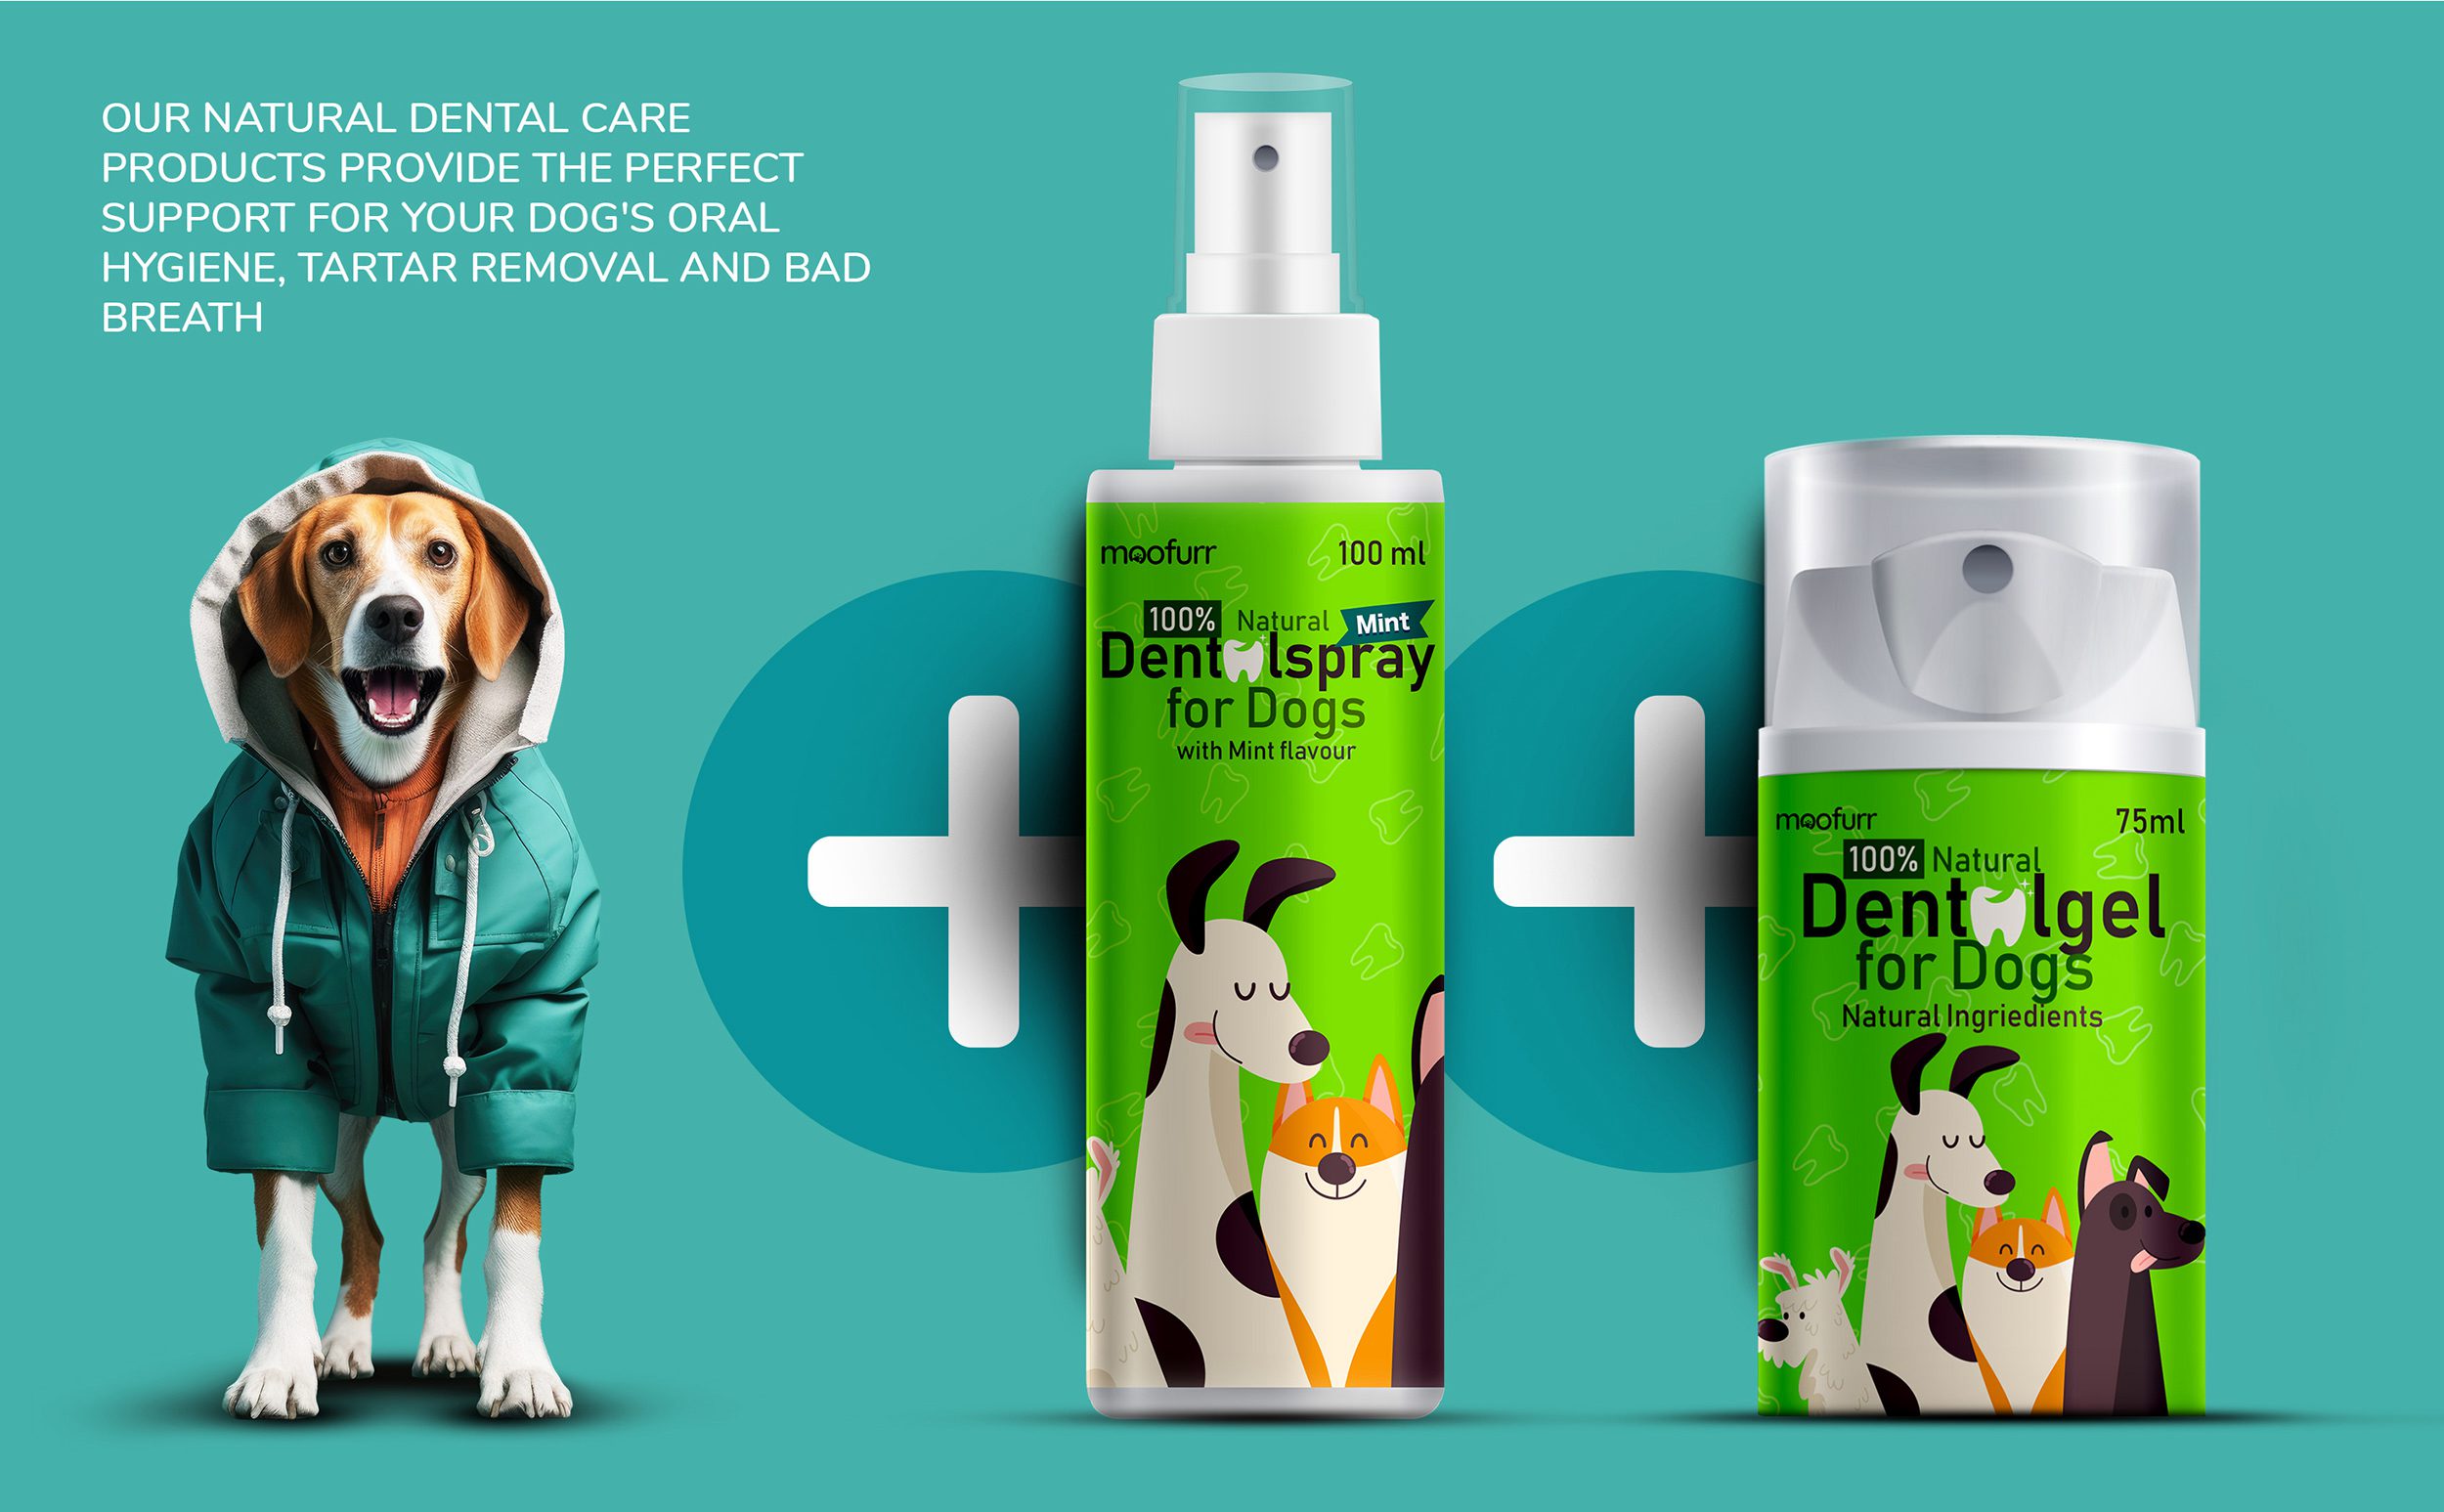 Our natural dental care Products provide the perfect support for your dog's oral hygiene, tartar removal and bad breath